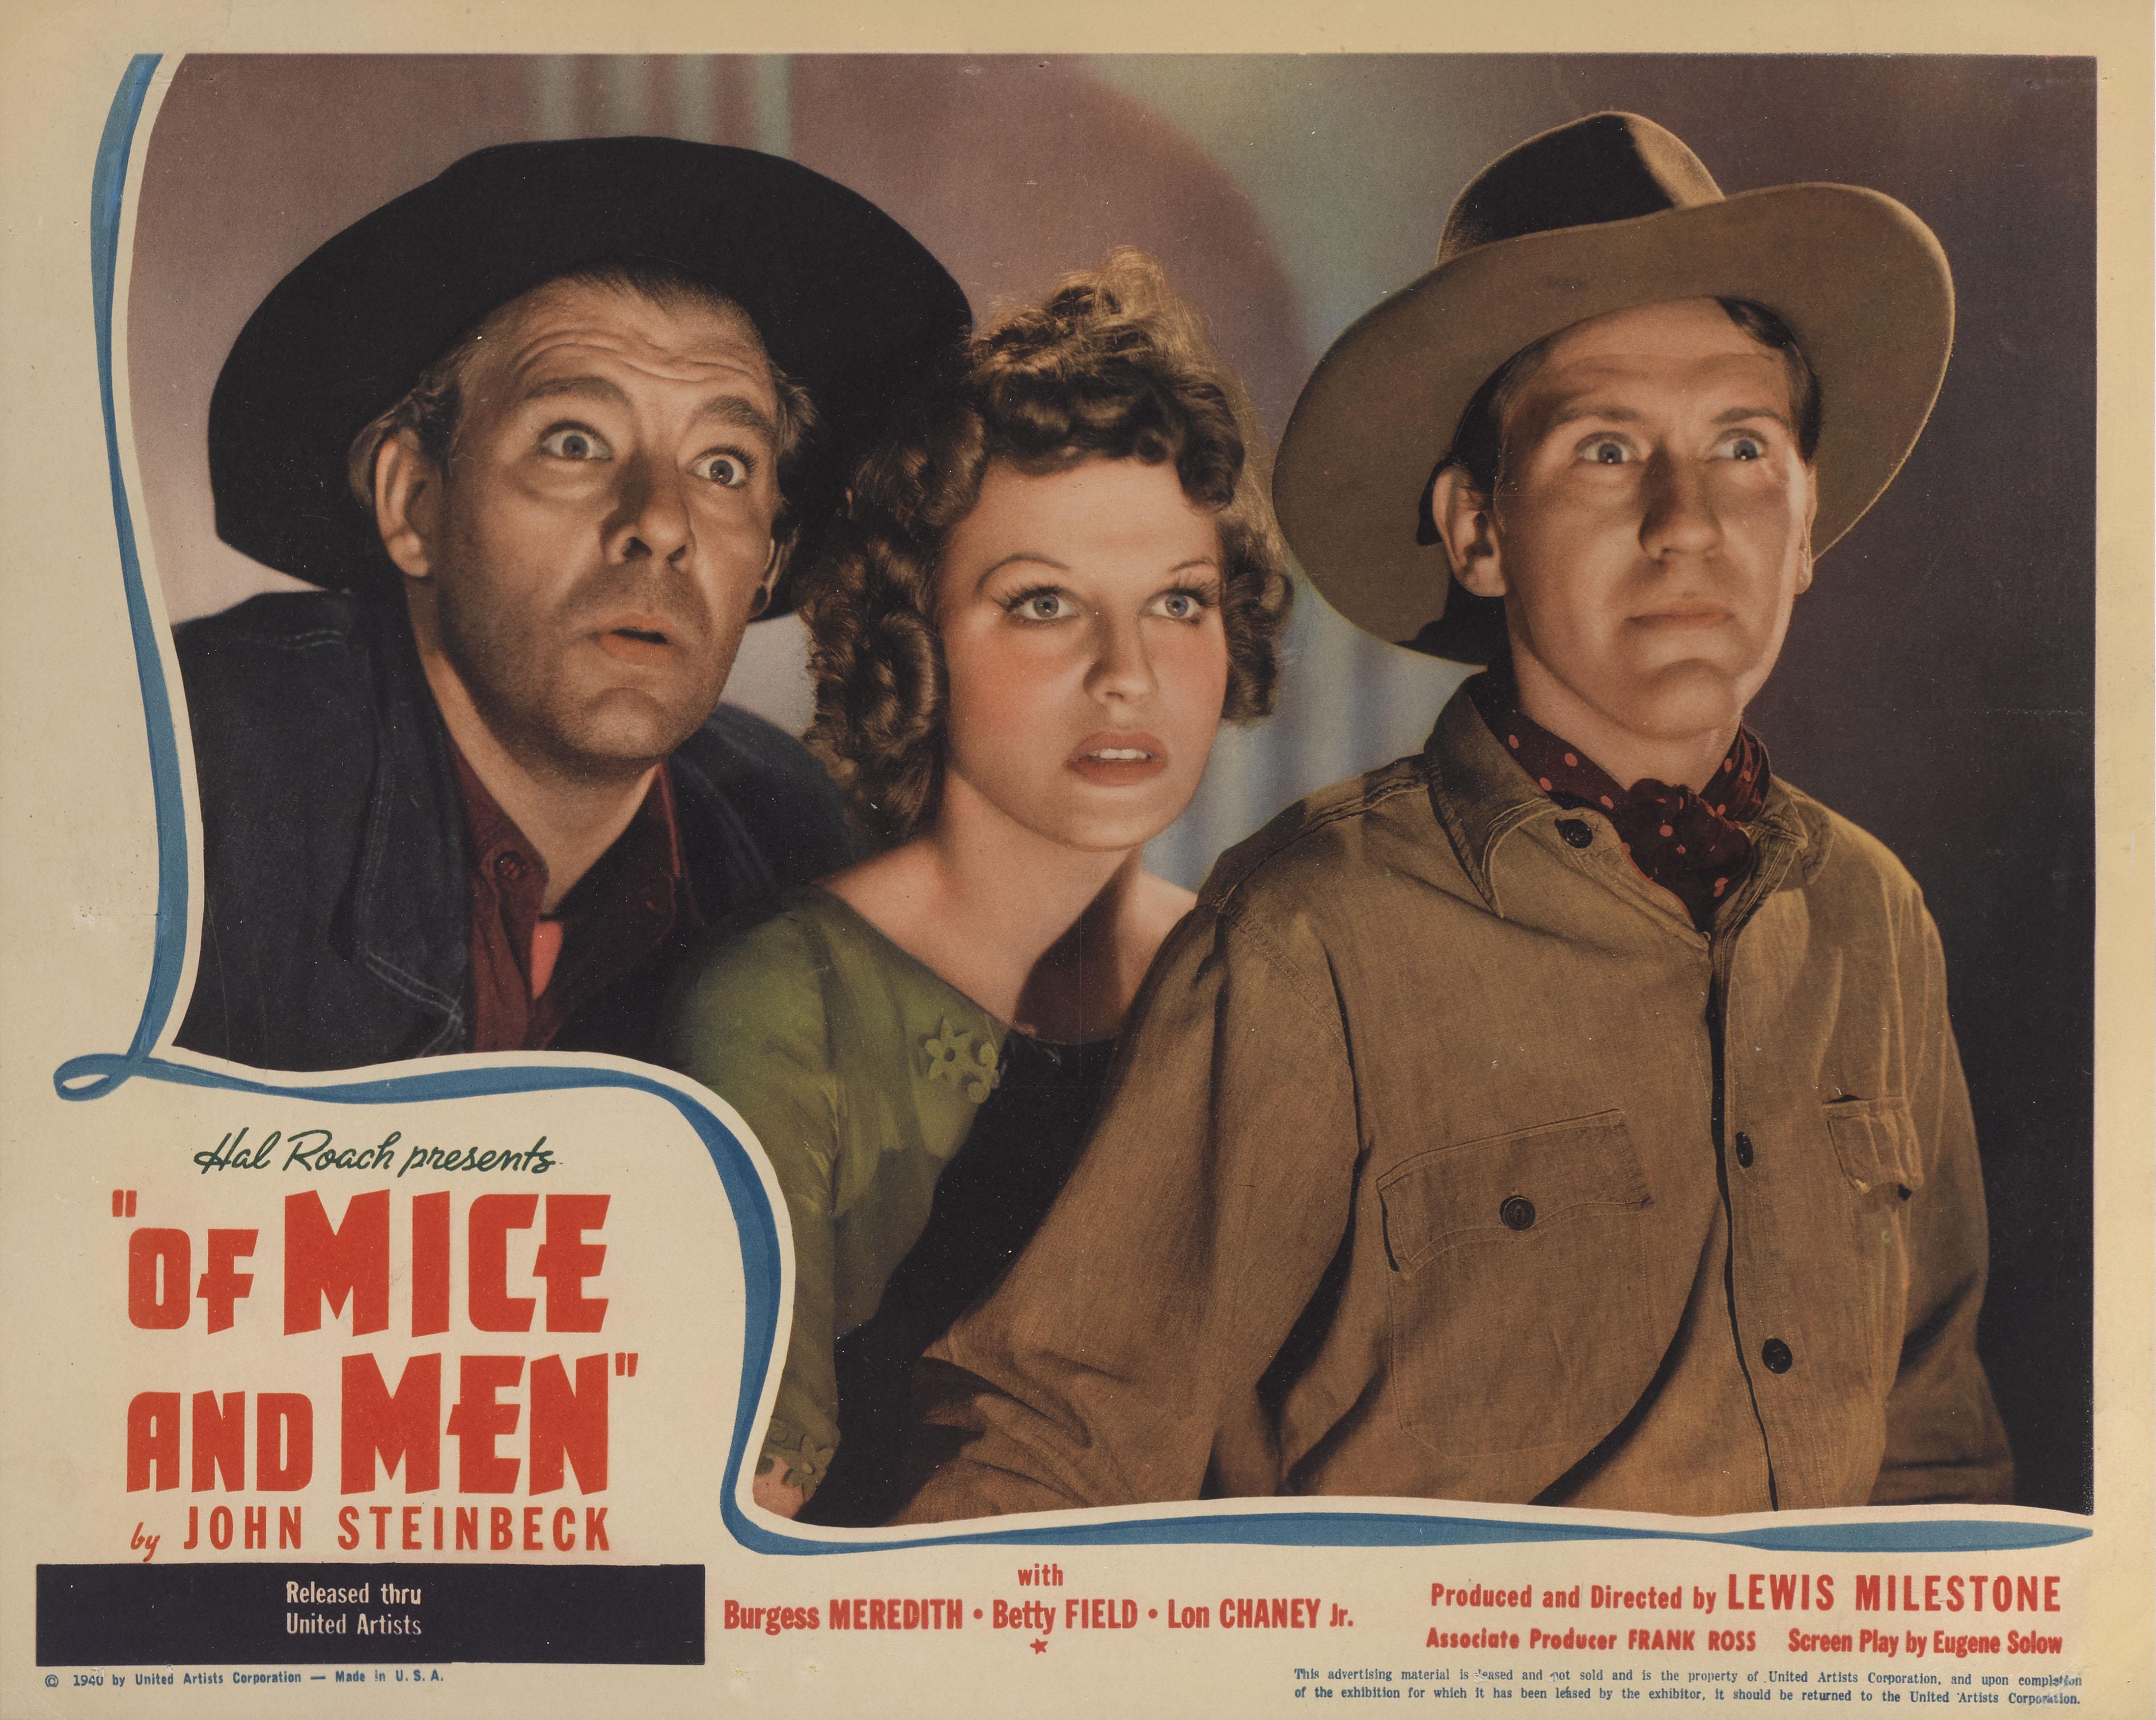 Original US lobby card for the 19339 adventure drama romance Of Mice and Men.
This film starred Lon Chaney, Burgess Meredith and Betty Field and was directed by Lewis Milestone.
This lobby card is conservation framed with UV plexiglass in an Obeche